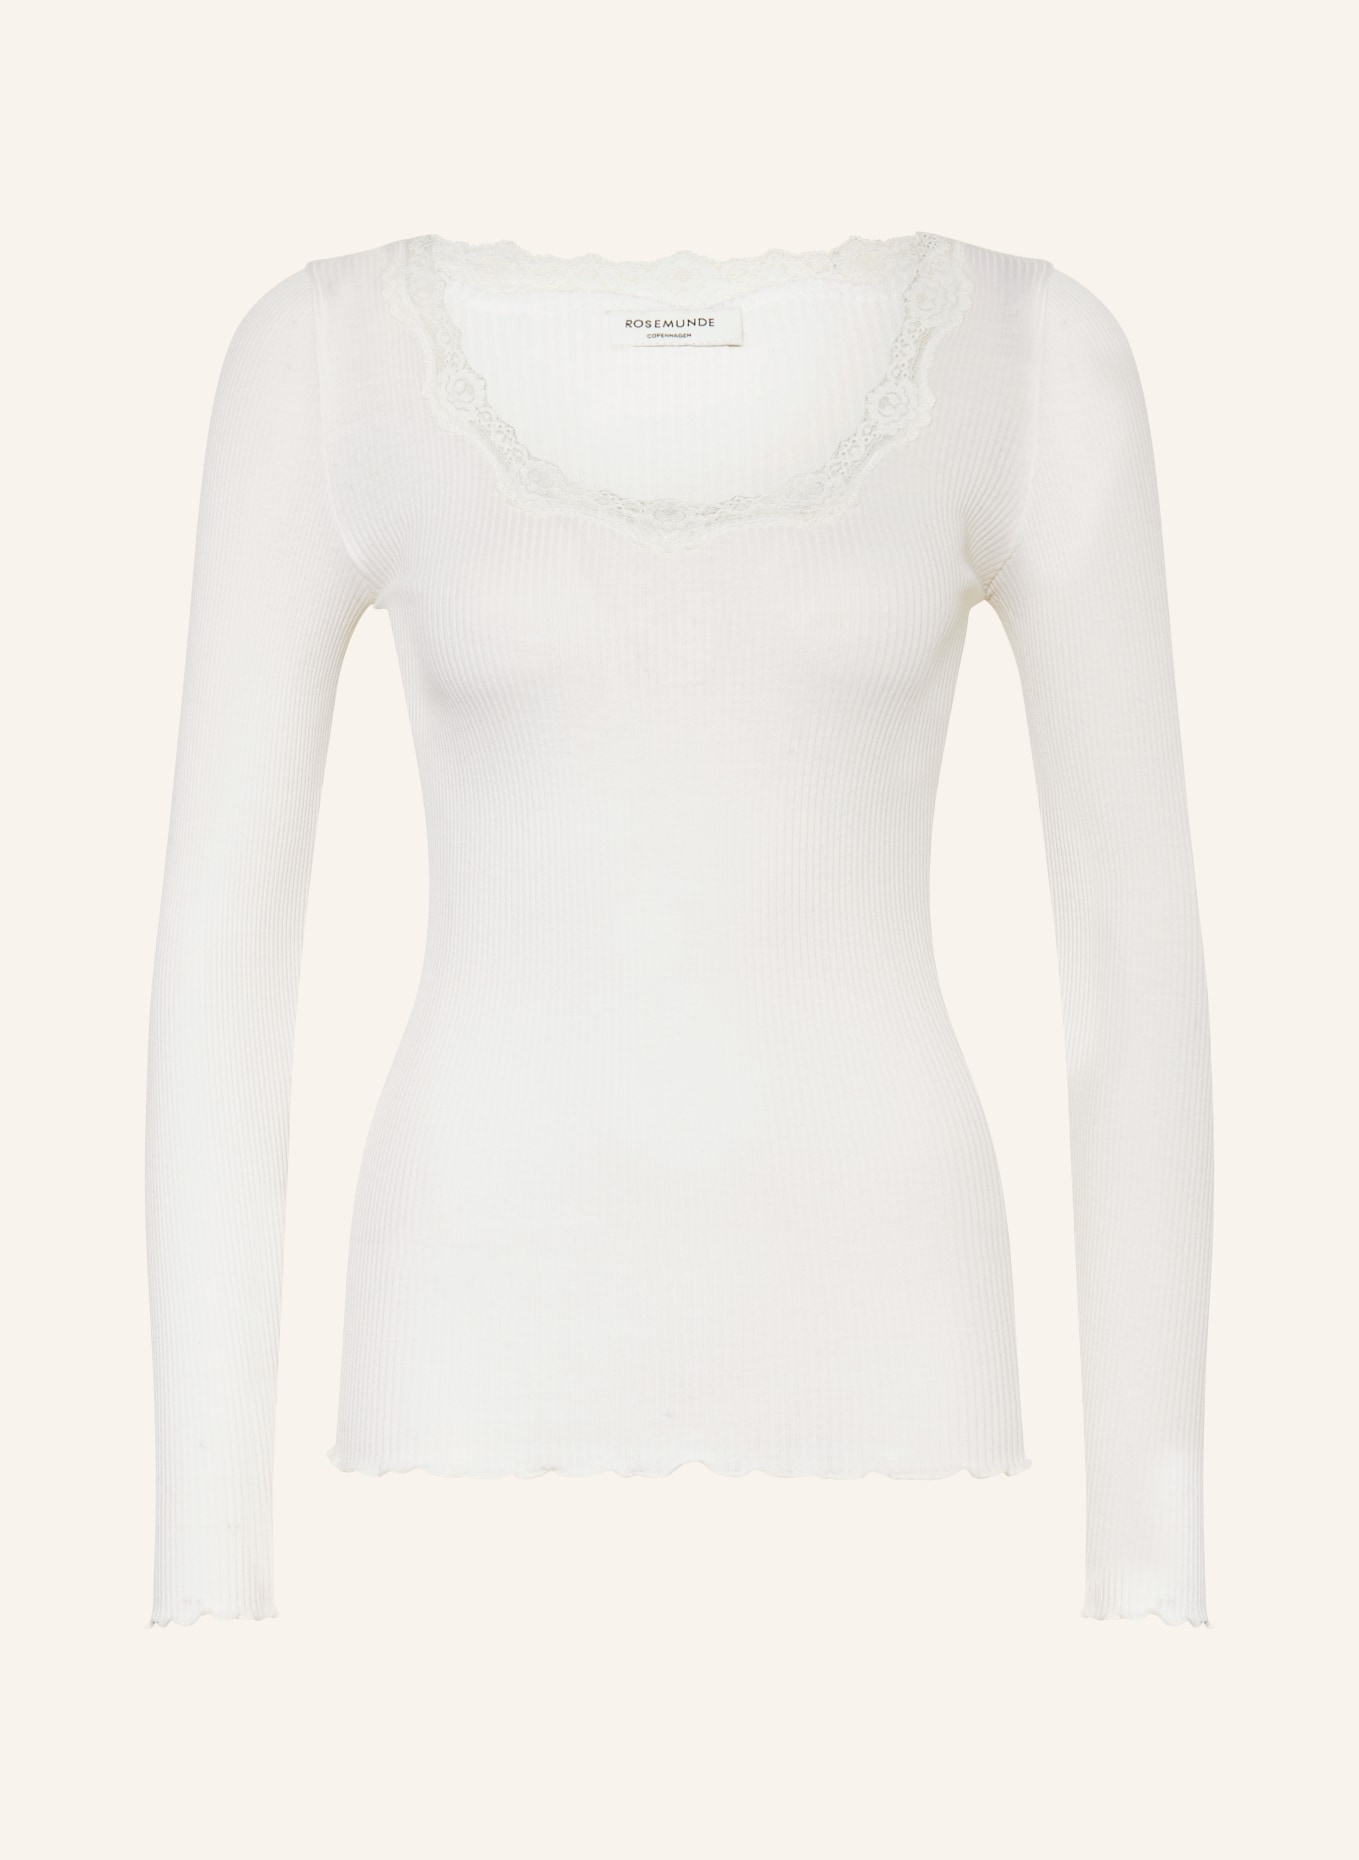 rosemunde Long sleeve shirt BABETTE in silk with lace trim, Color: WHITE (Image 1)